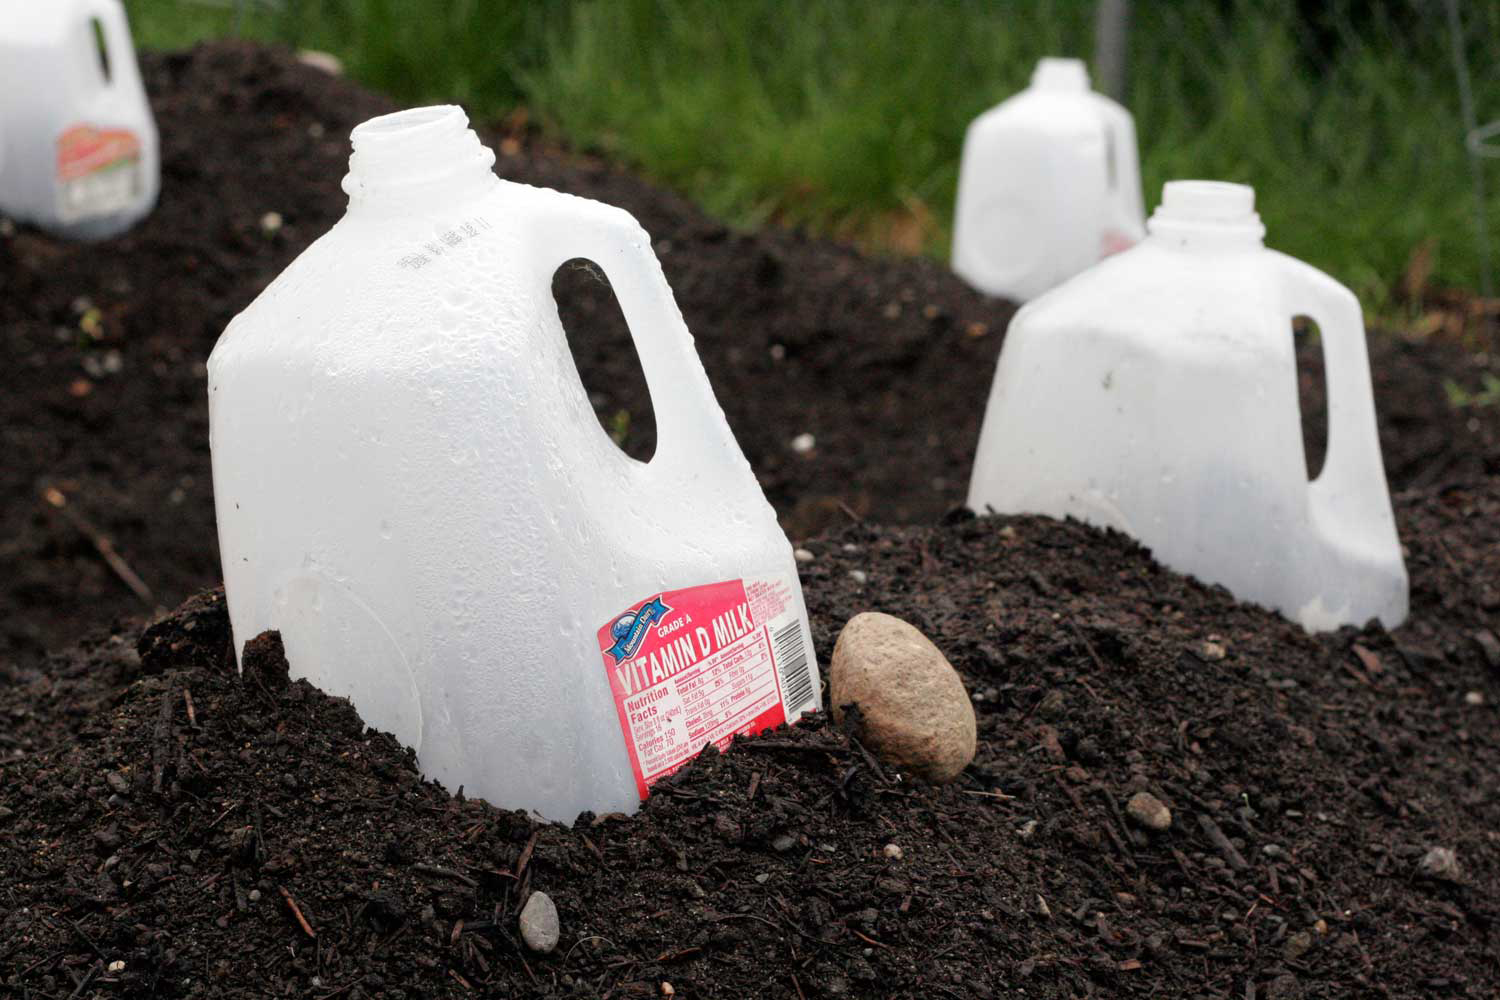 A super easy garden hack is to make a milk jug cloche by cutting off the bottom of a gallon-size jug and placing it over a plant, making sure to push the bottom of the jug about an inch deep in the soil. Tie the handle of the jug to a nearby stake to prevent it from blowing away. Keep the lid of the jug closed at night for maximum protection, but remove the lid to vent the cloche during the day to avoid overheating the plant.